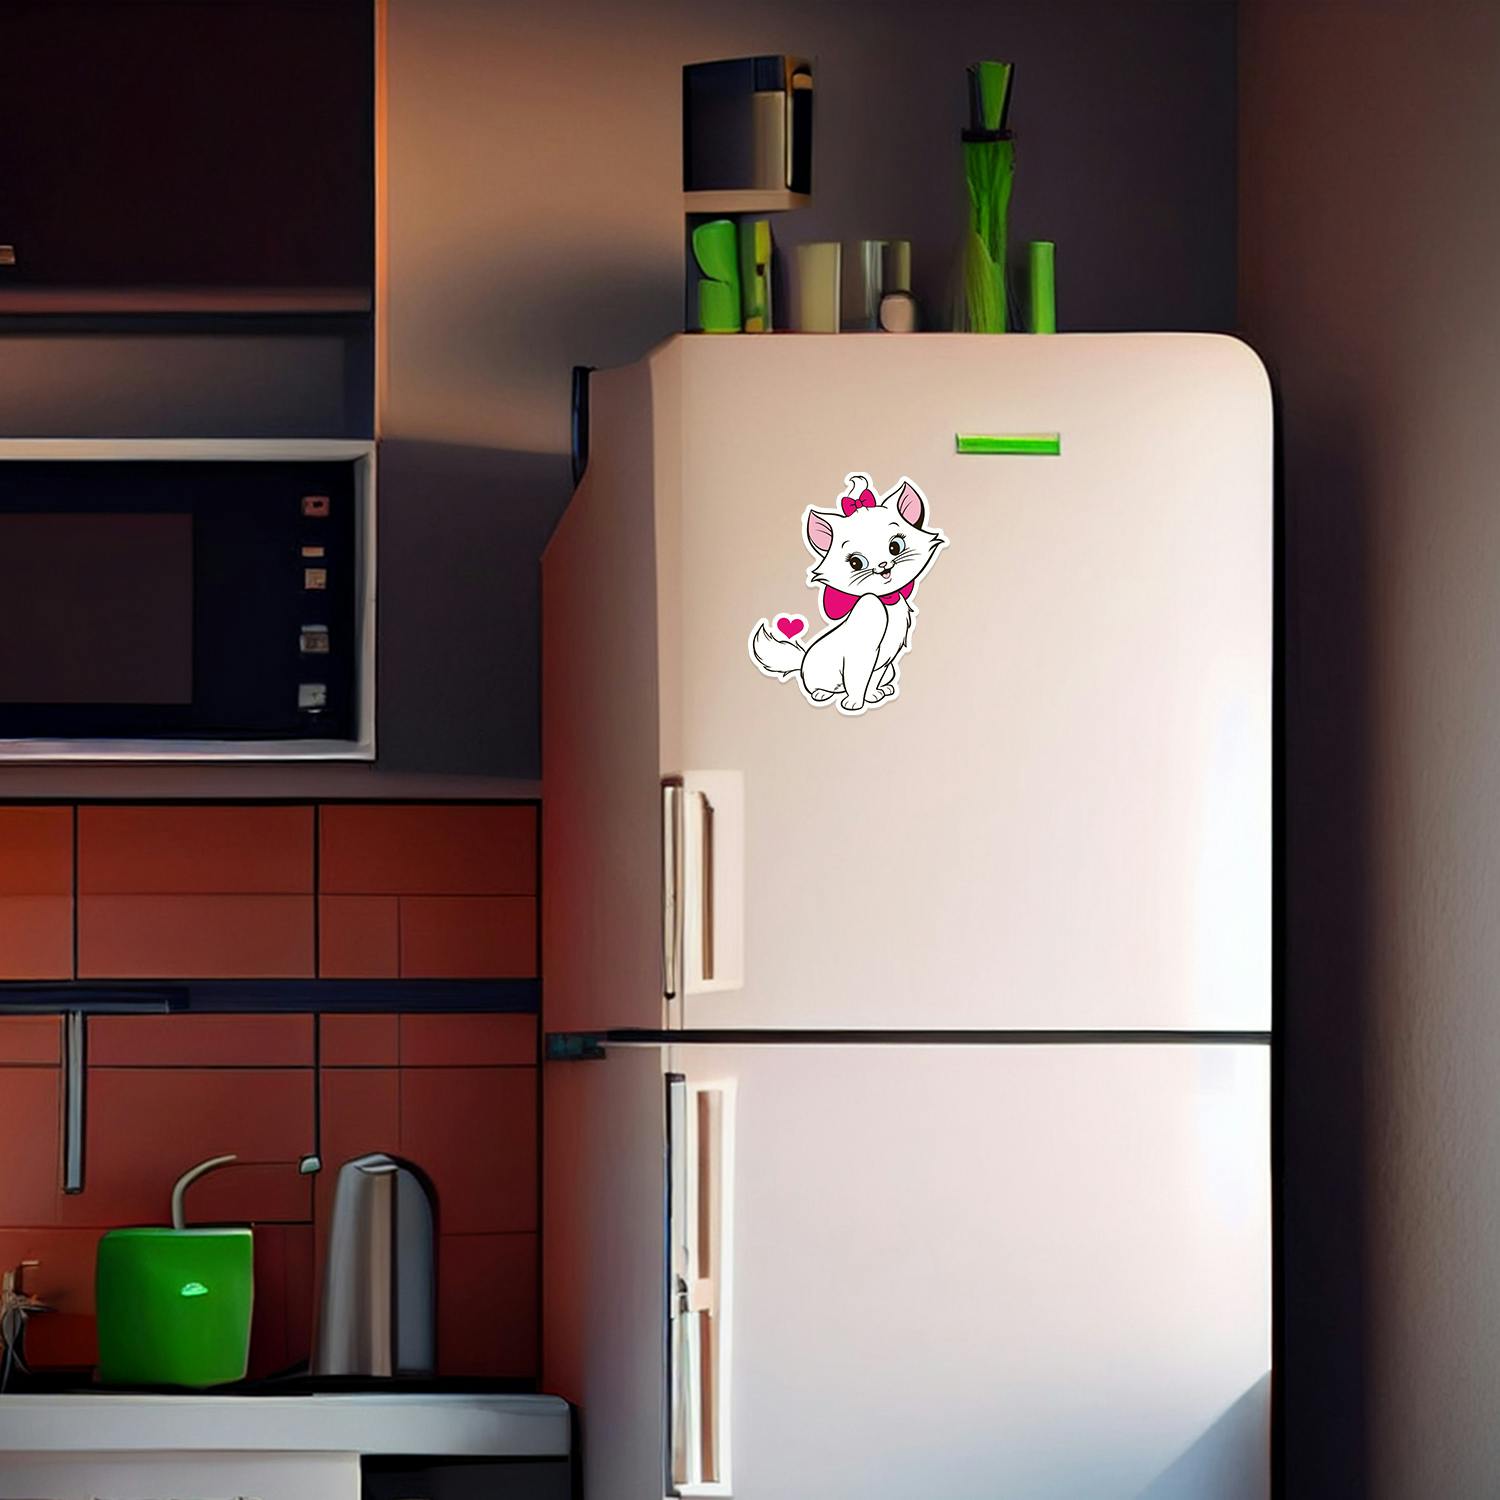 Adorable Cute Cat Fridge Magnet - Add Some Whimsy to Your Kitchen!